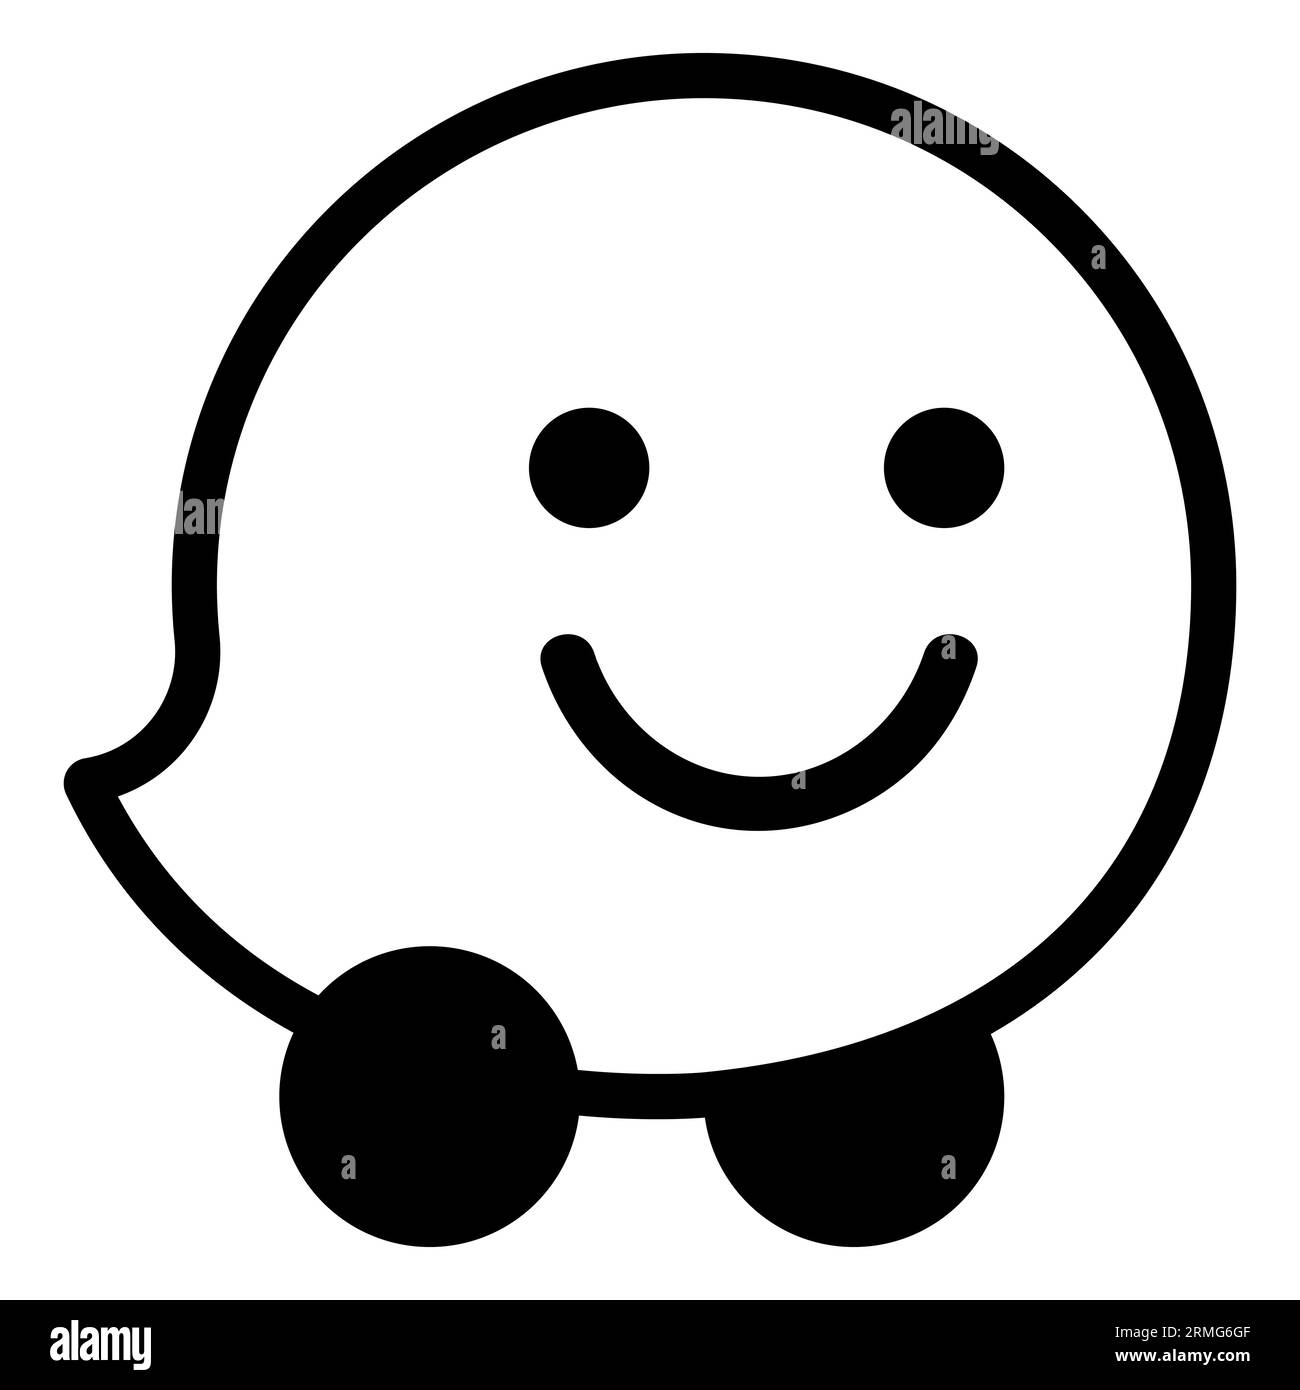 Waze logo. Design can use for web and mobile app. Vector illustration Stock Vector